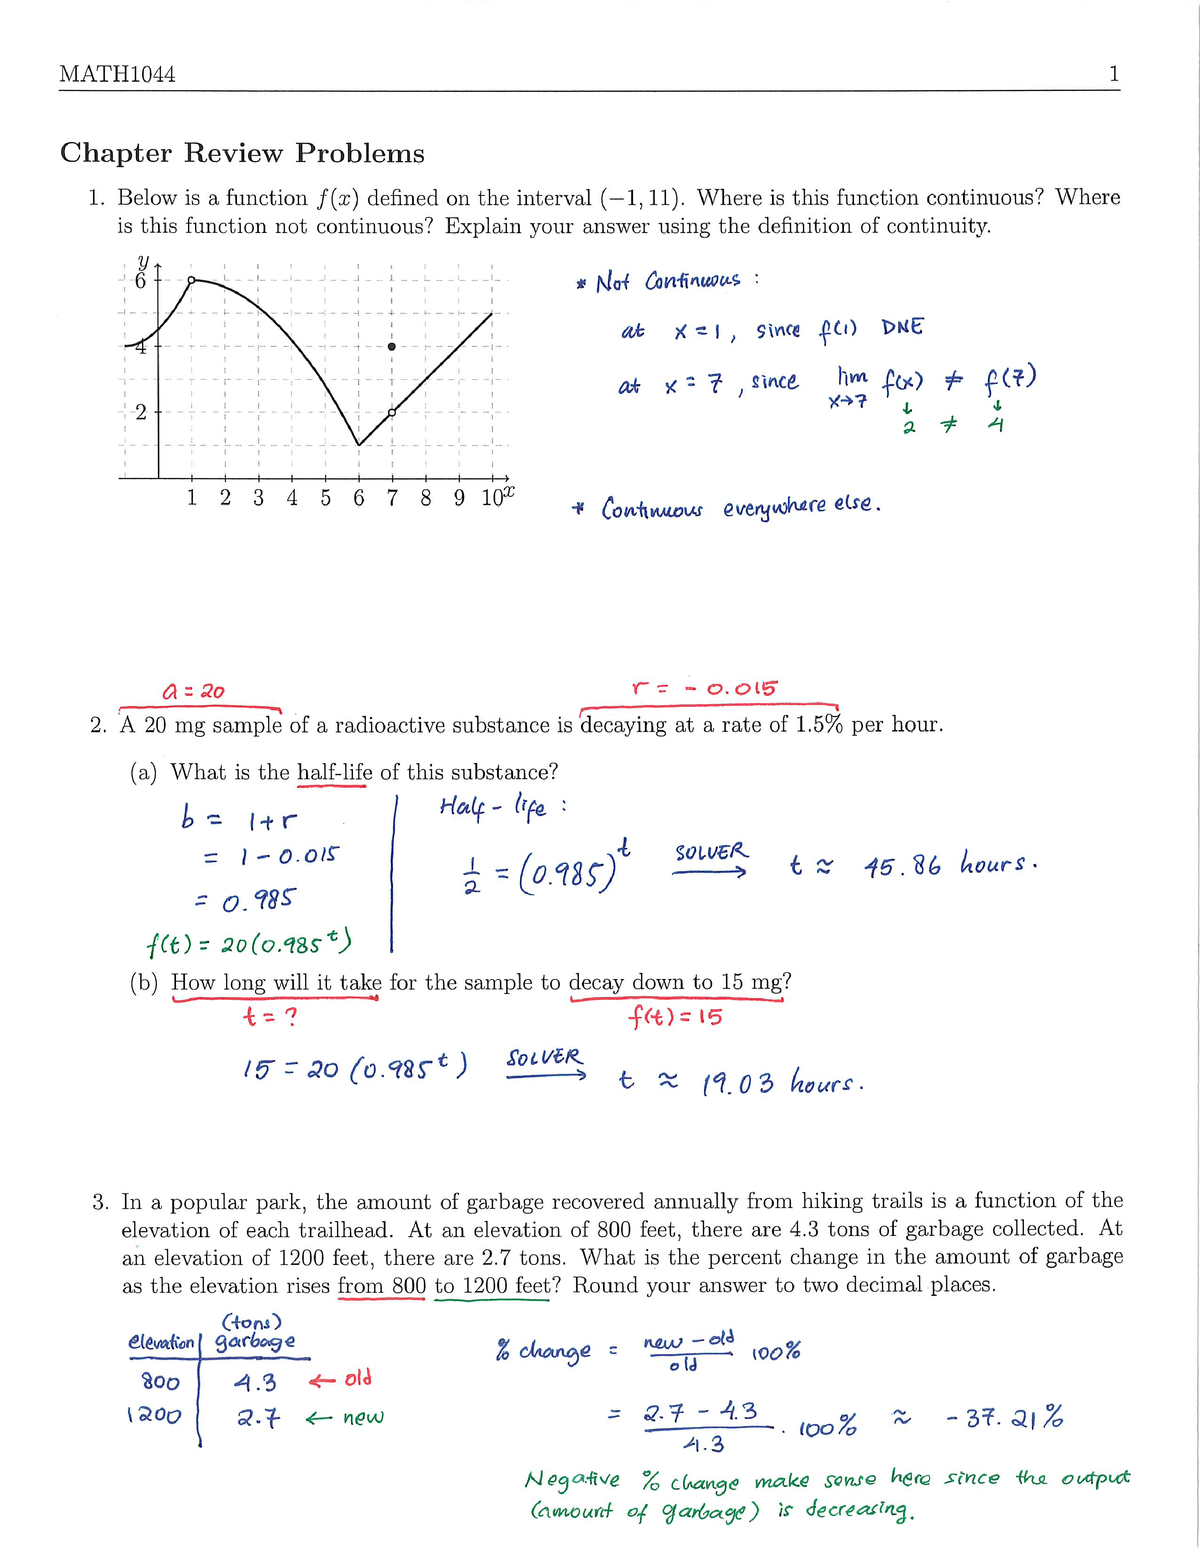 Chapter 1 Review - Solution - MATH1044 - Studocu